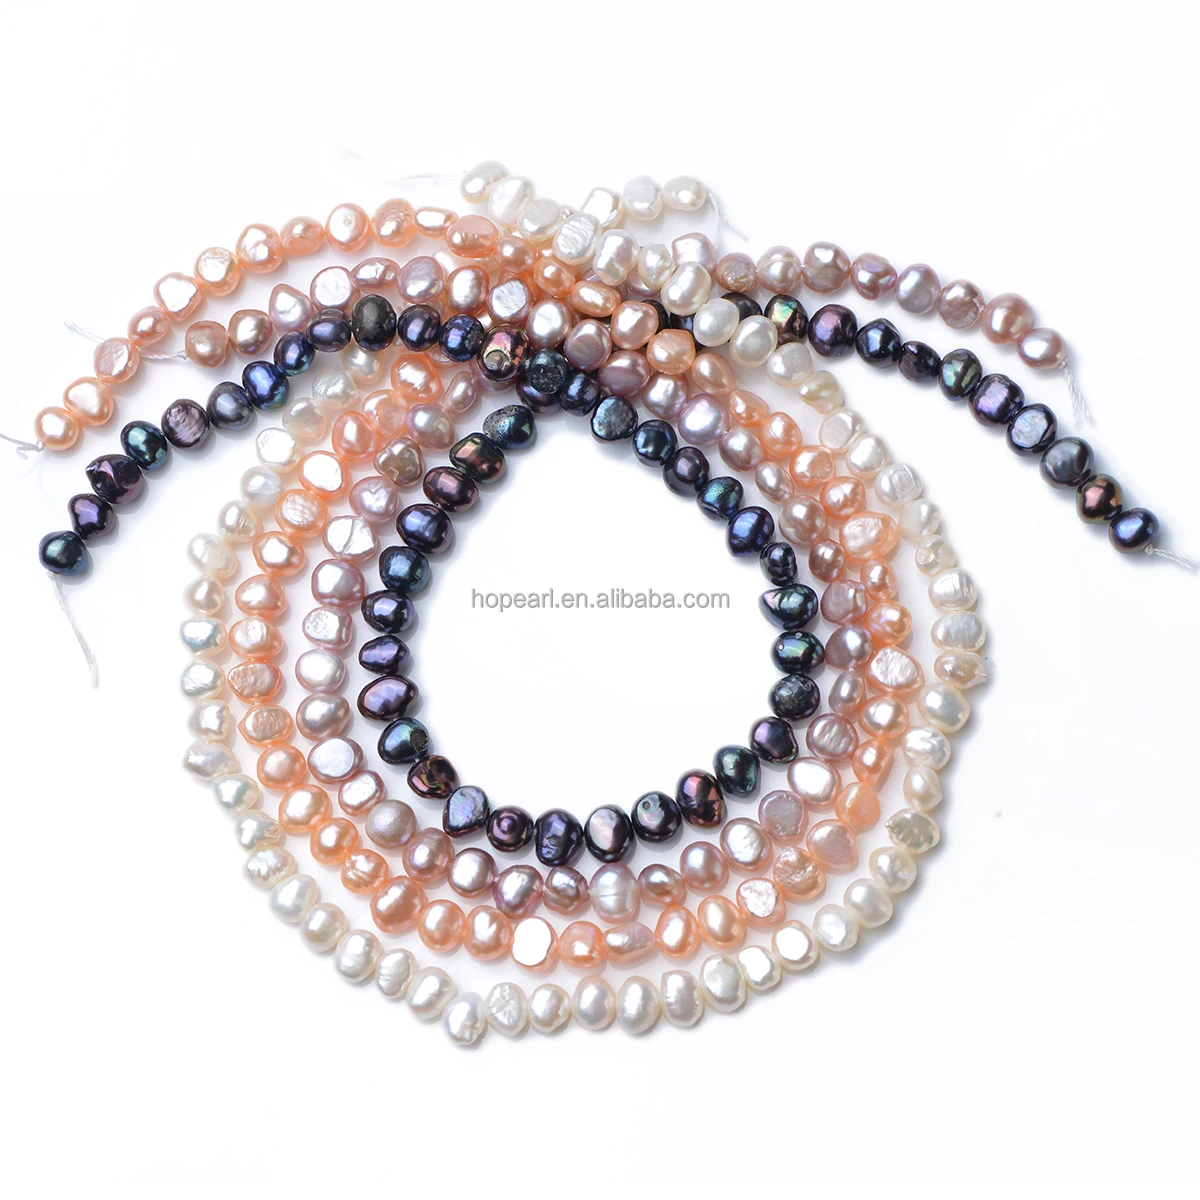 Lpb08 Wholesale 7-8mm Nugget Loose Natural Freshwater Pearl Strand For ...